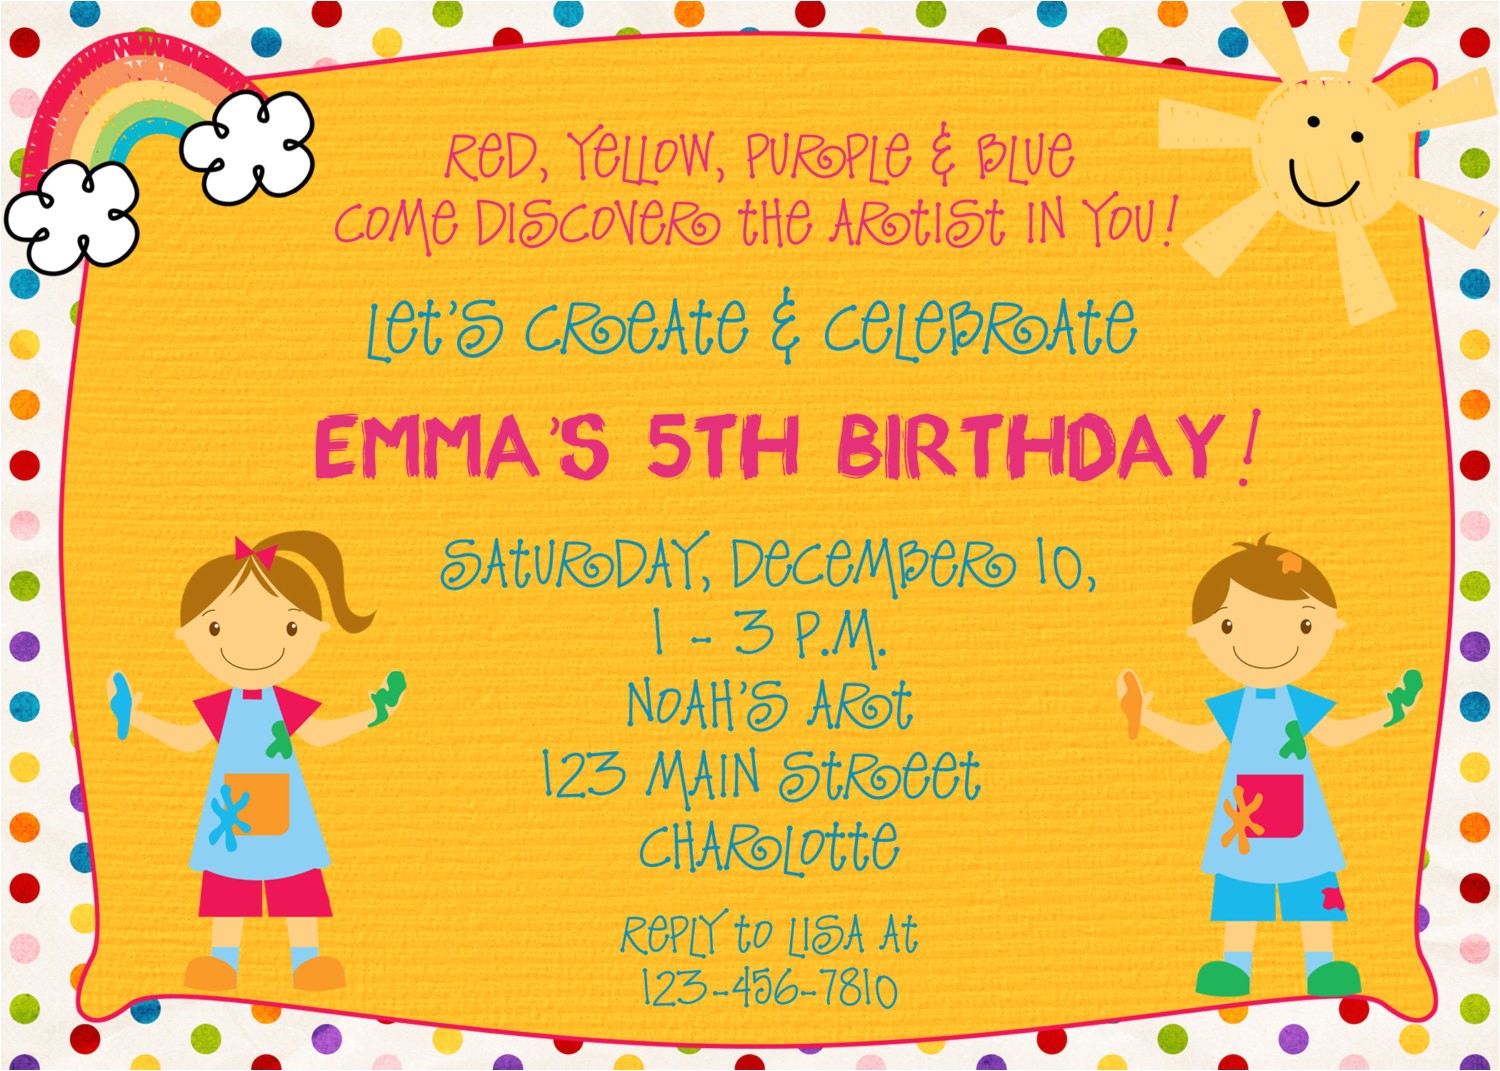 arts and crafts birthday party invitations